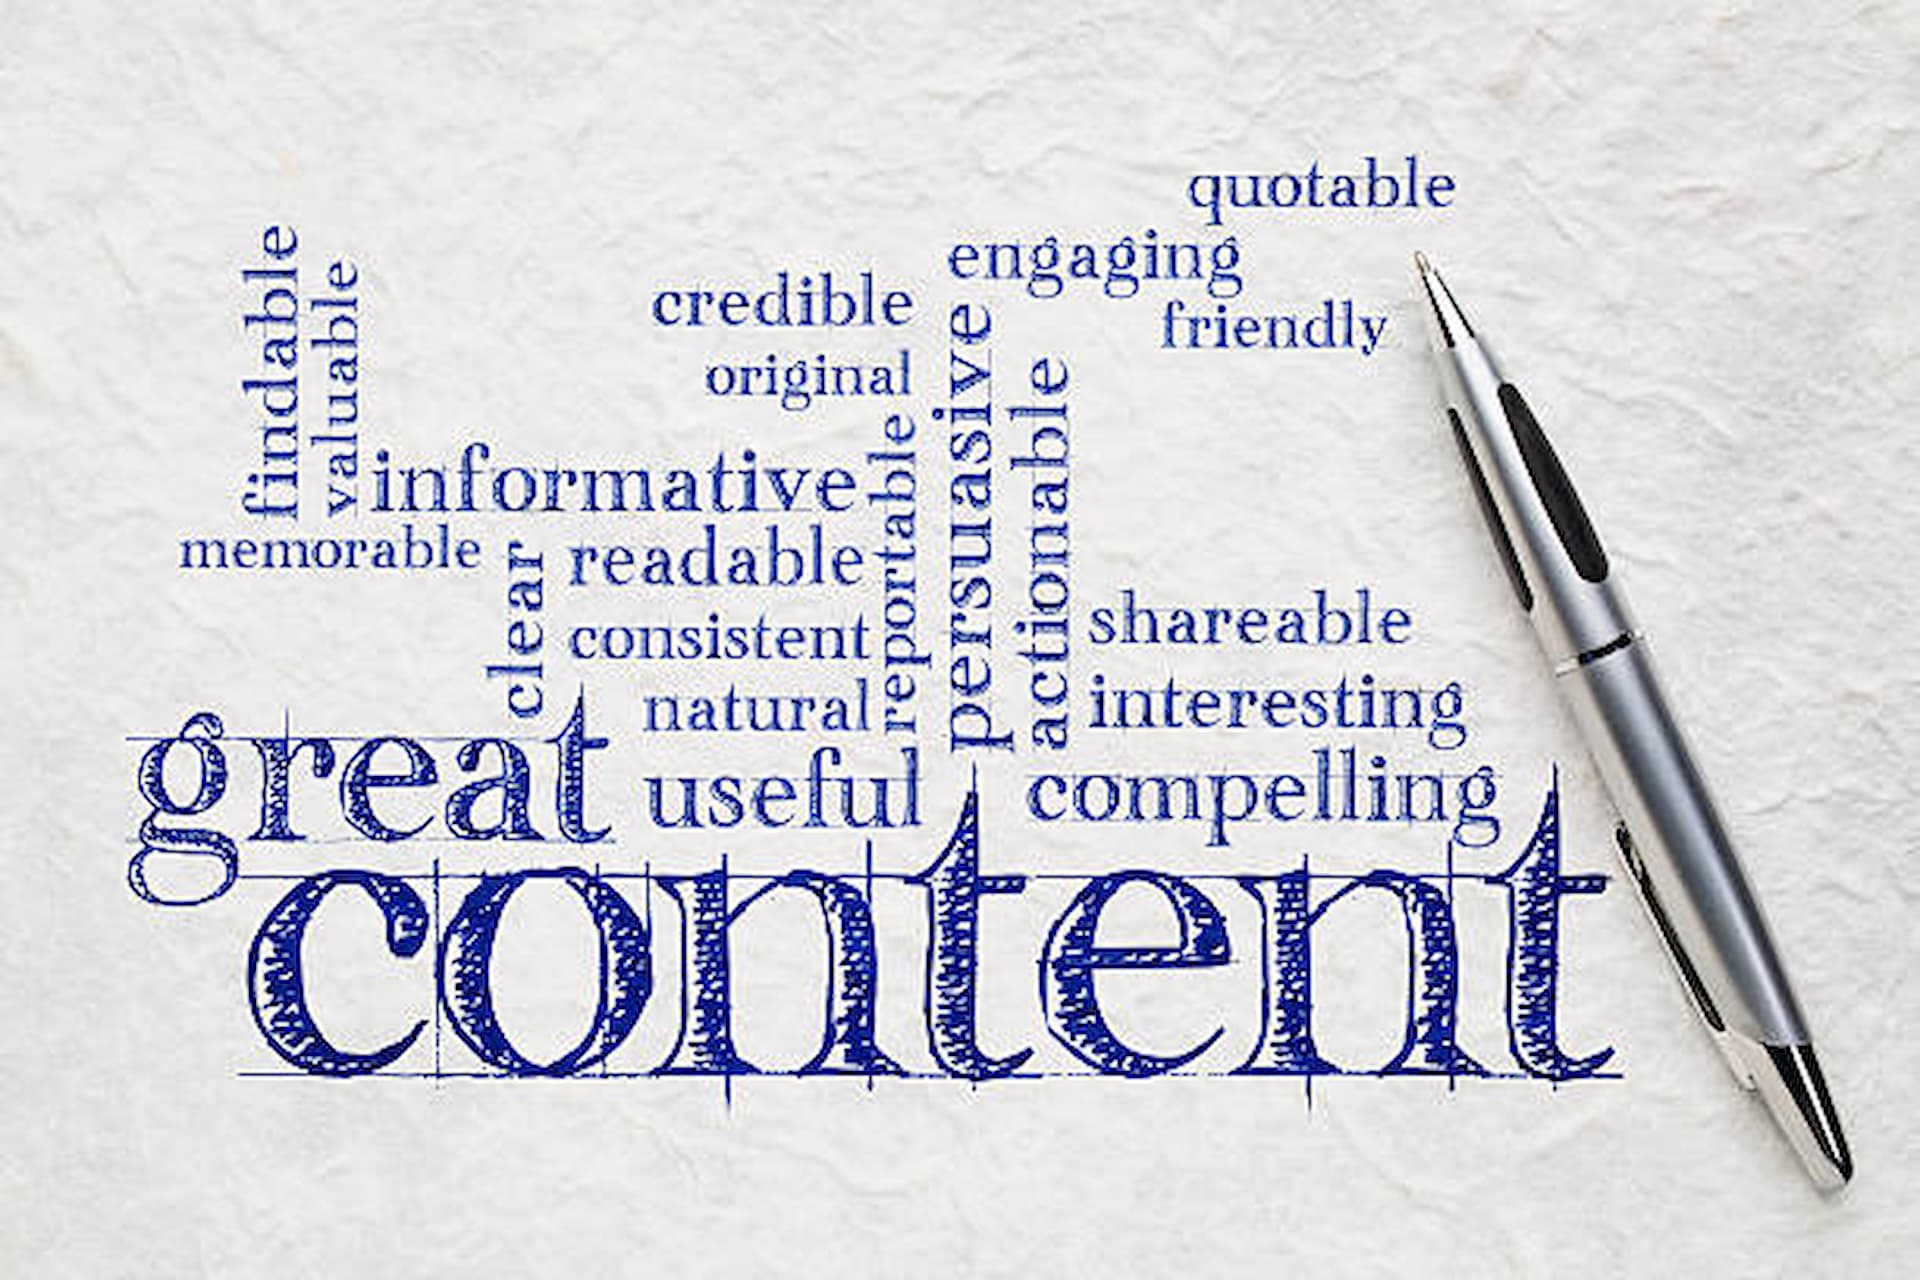 Creative Writing Strategies For Content Writing